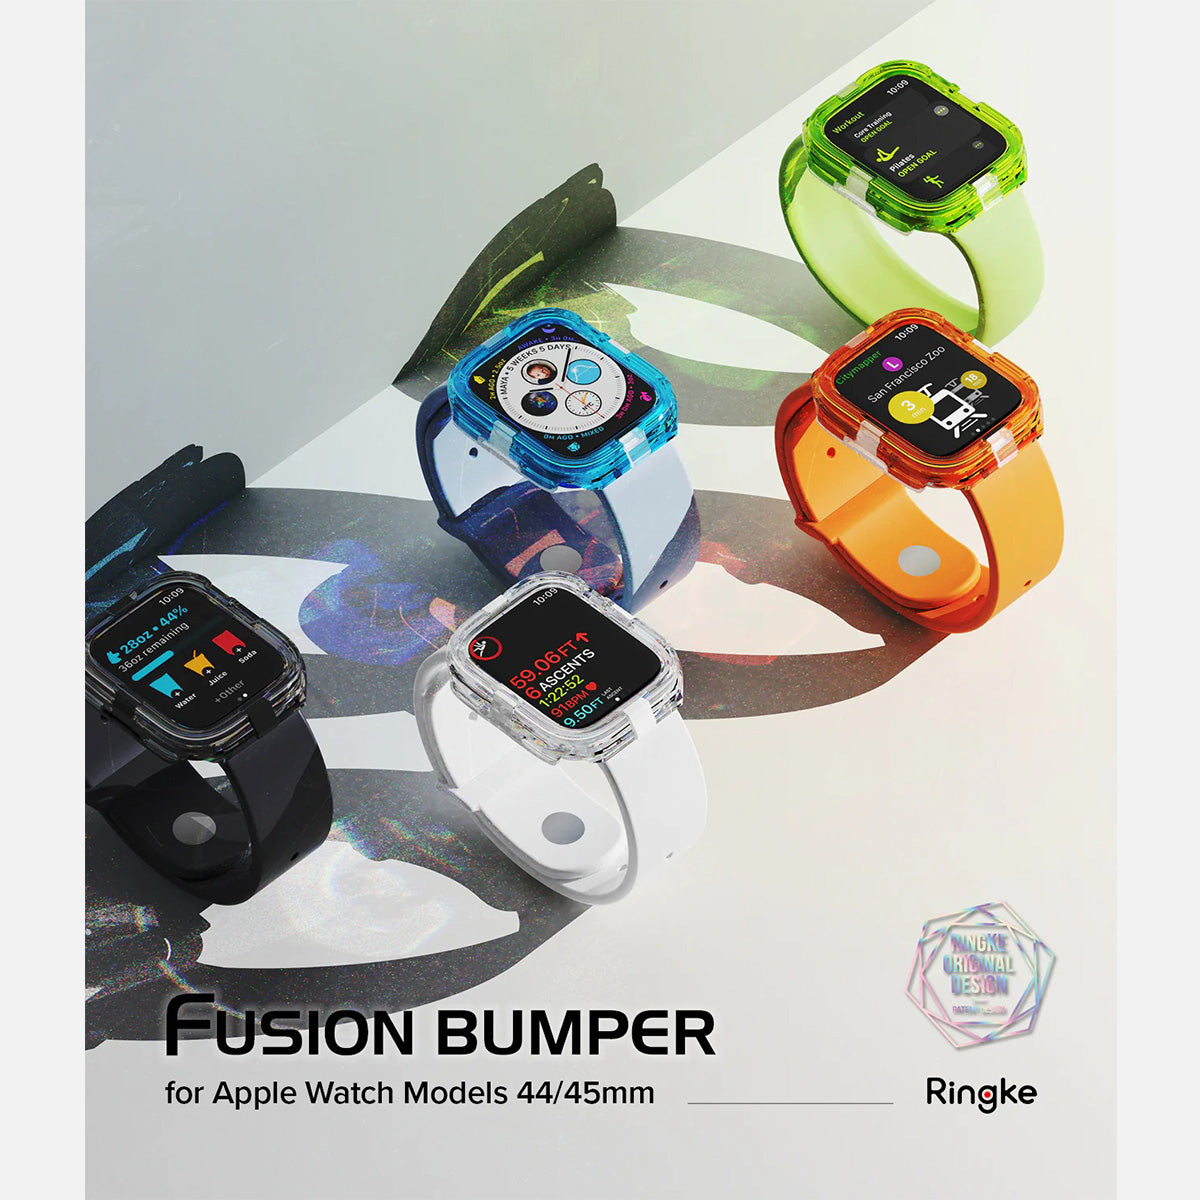 Ringke Fusion Bumper Case for Apple Watch – 45mm/44mm